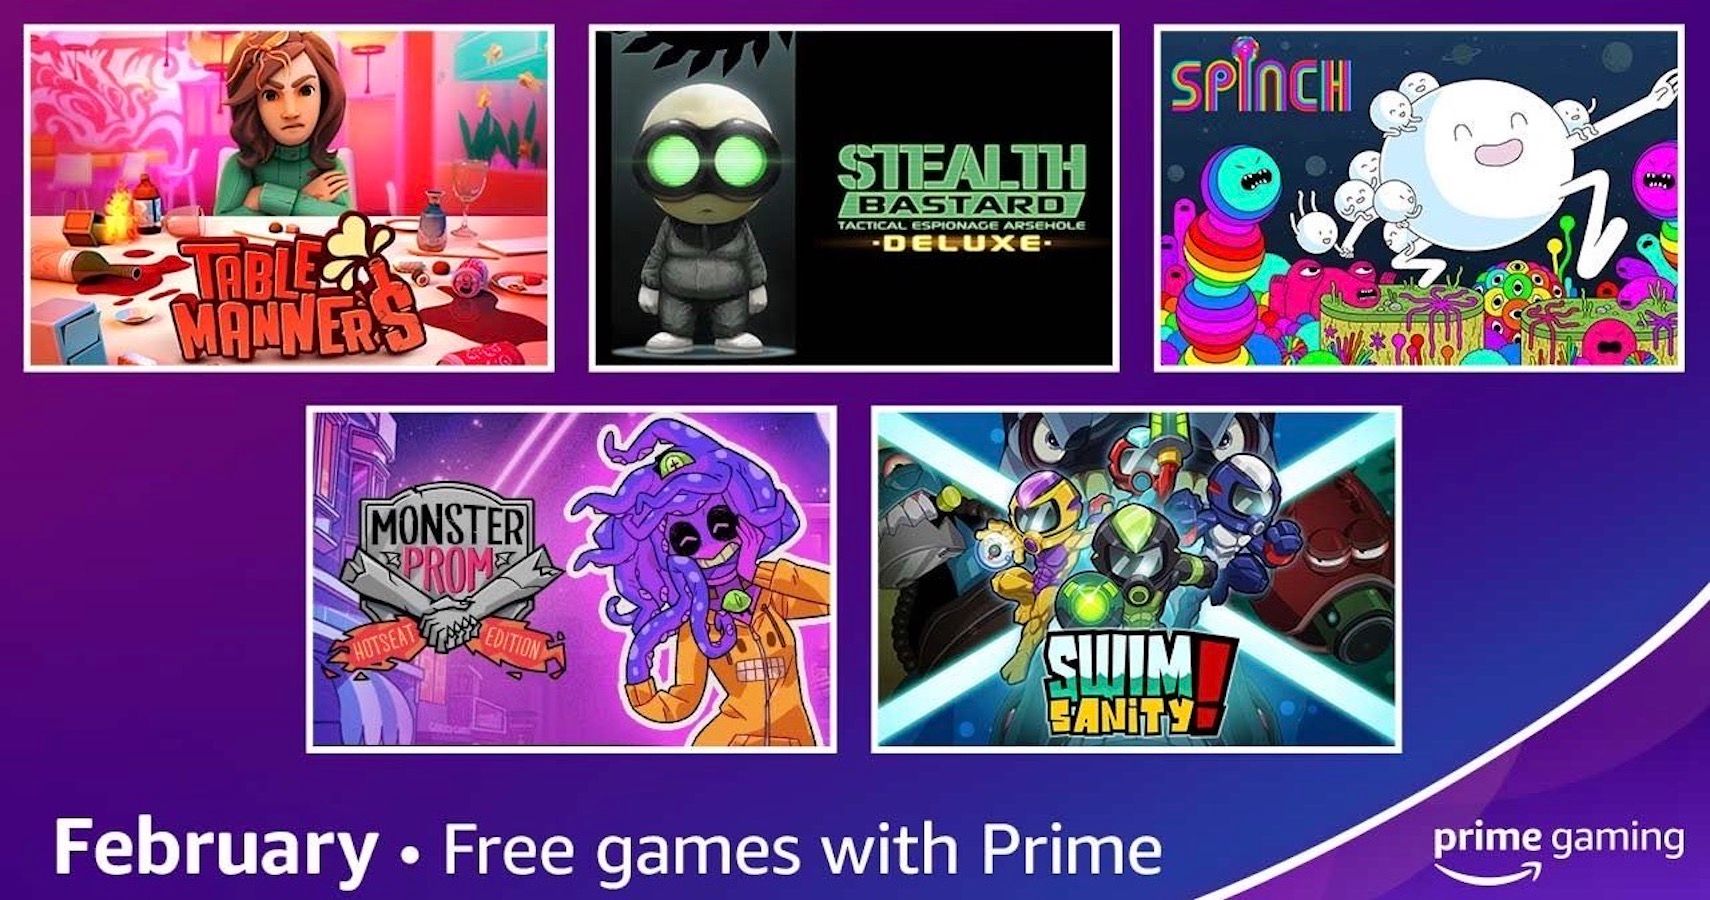 Amazon Prime Gaming Giving Away Eight Games For Free In February